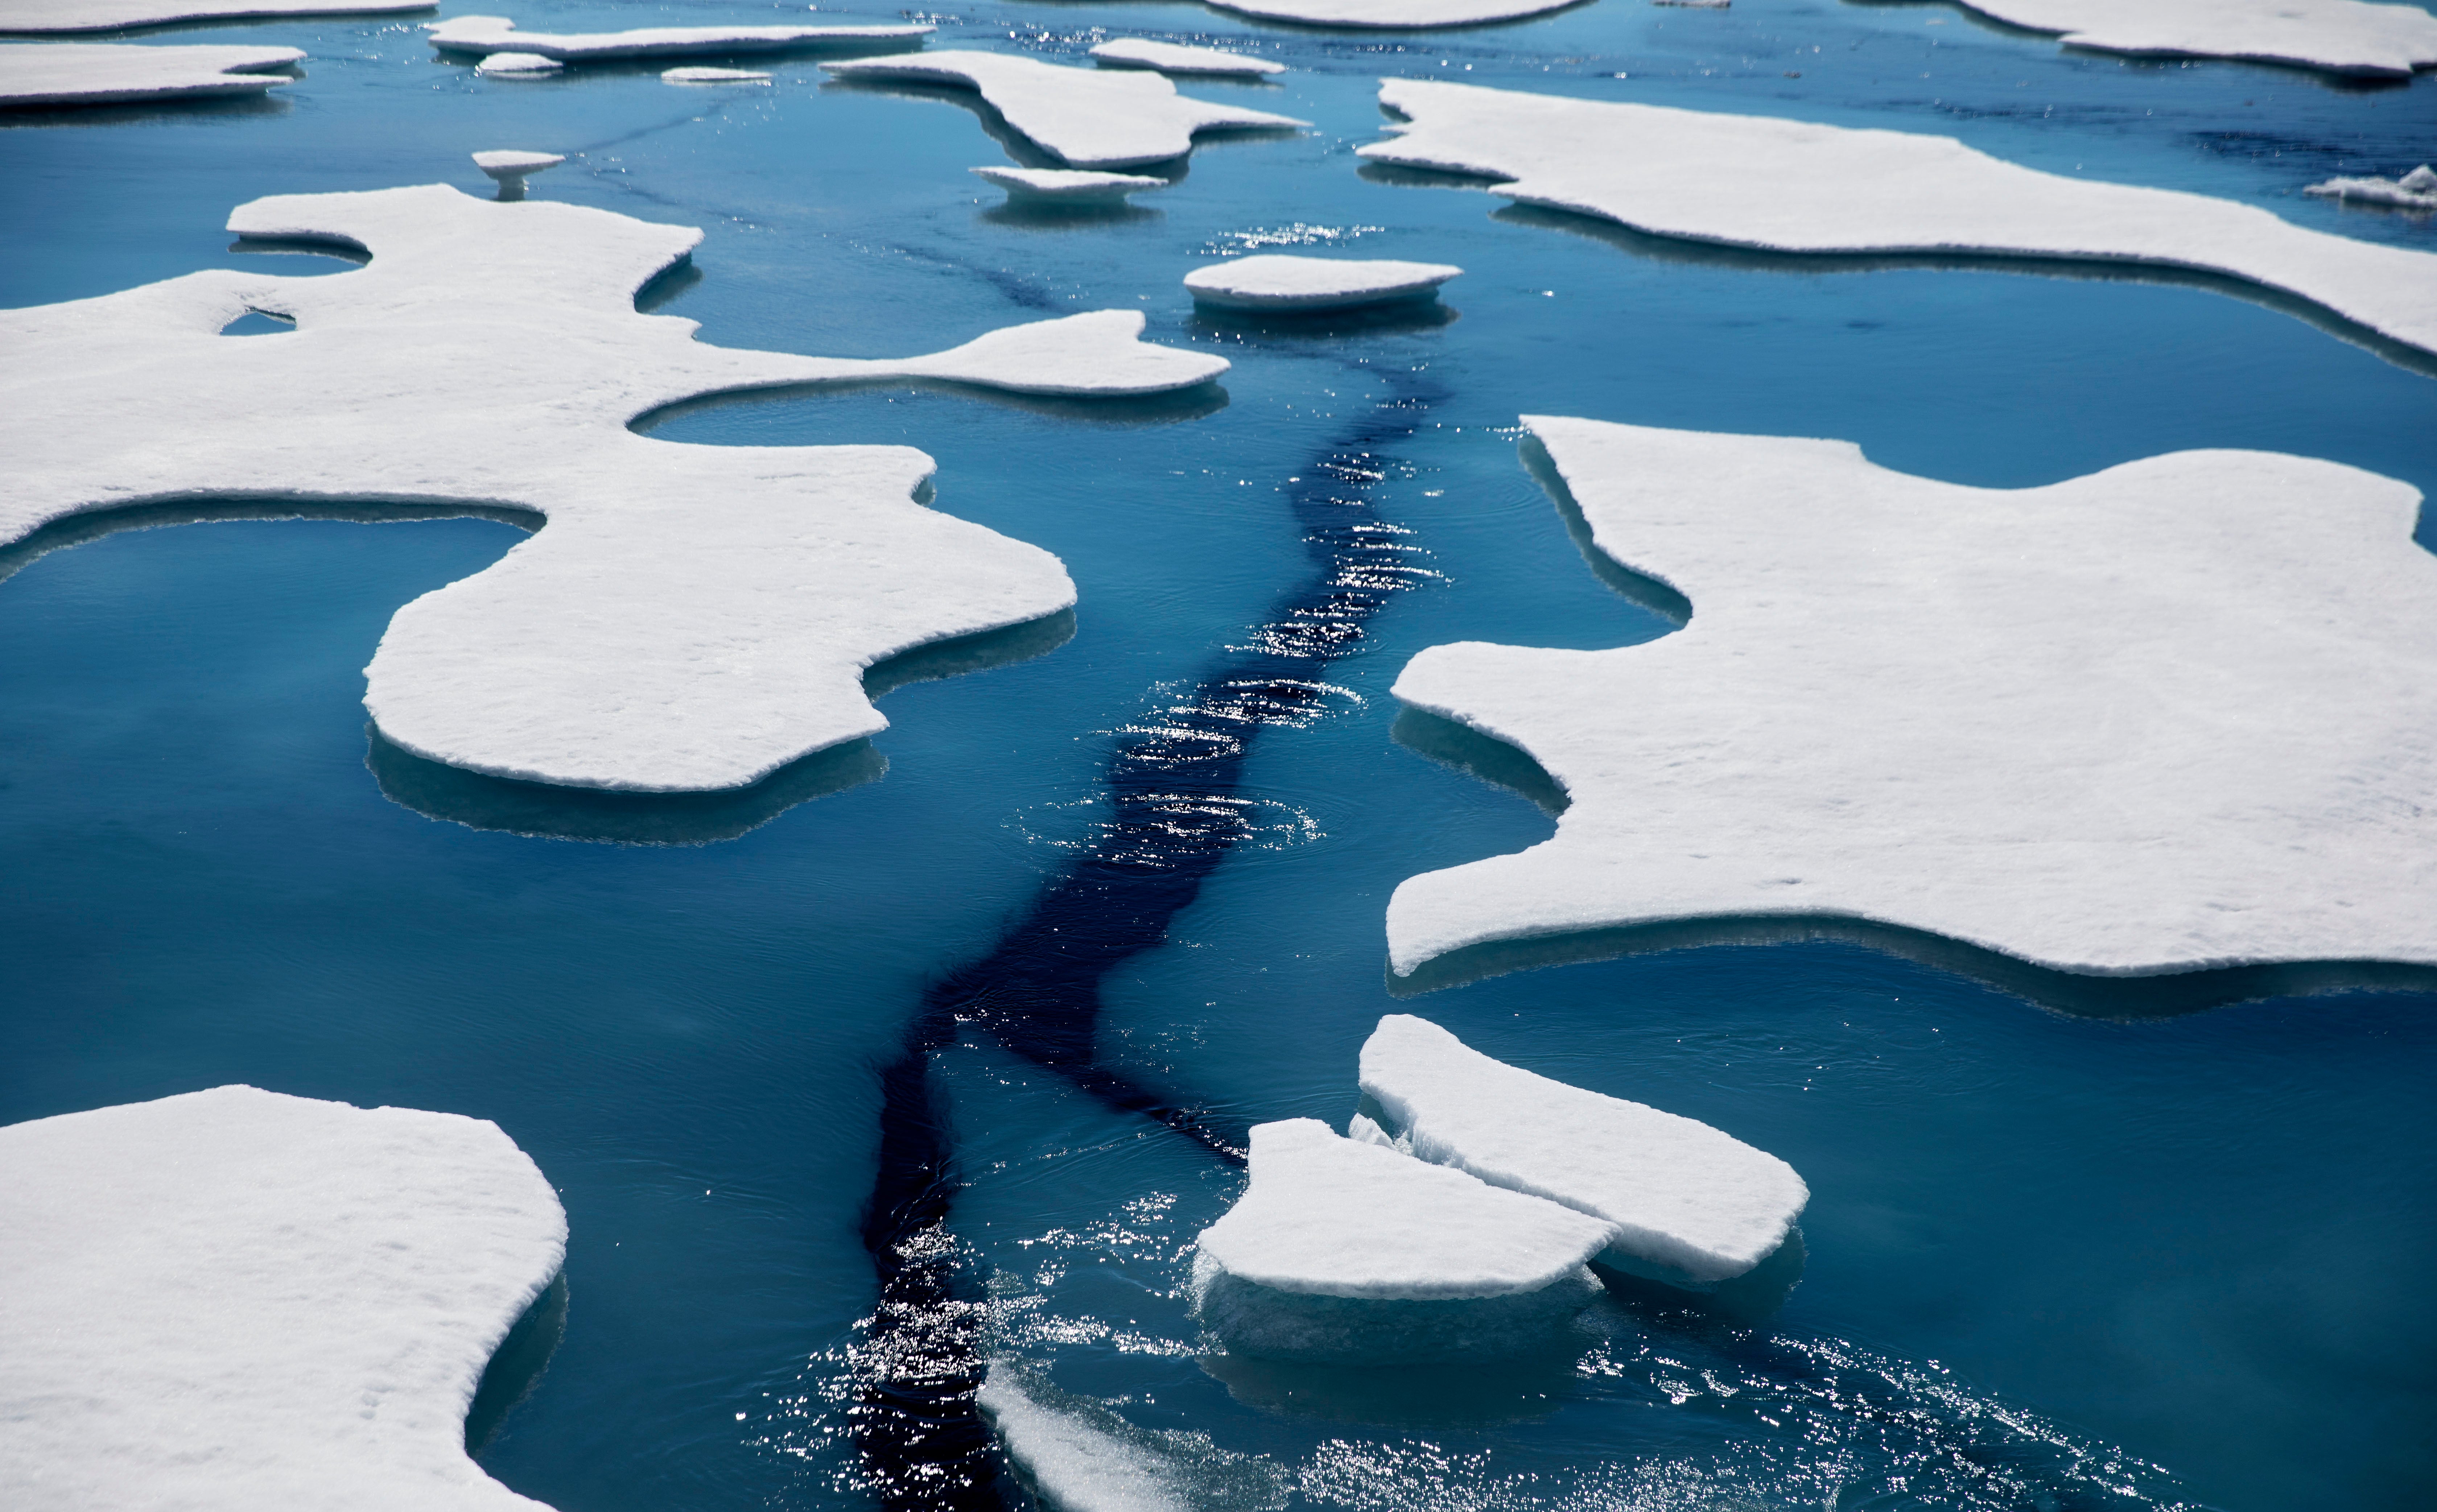 Sea ice is melting at an alarming rate, says scientists